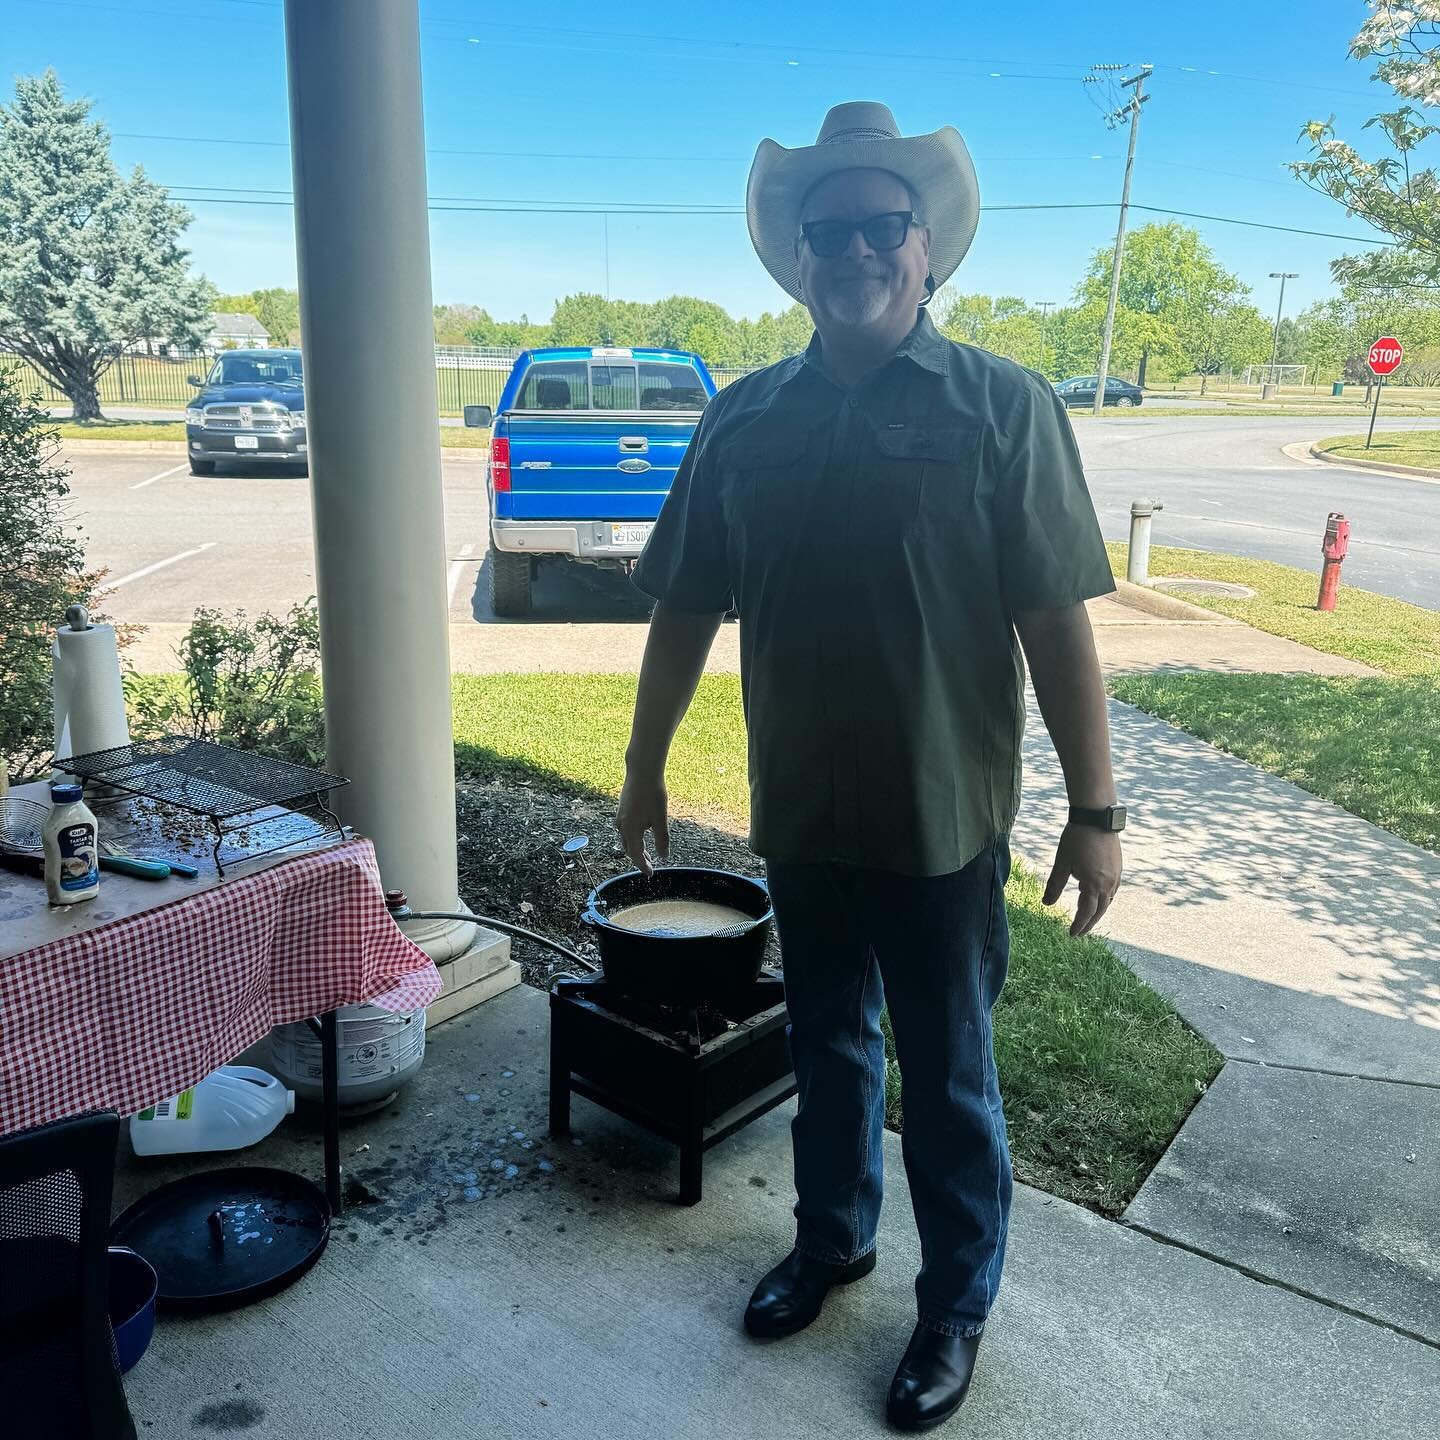 Today&rsquo;s lunch at the Corporate office was the annual fish fry provided by our Lead Solutions Architect, Jeff! Jeff caught over 100 crappie fishing and shared it with us for a potluck lunch. Lunch included fish tacos, pico de gallo, salads, fres